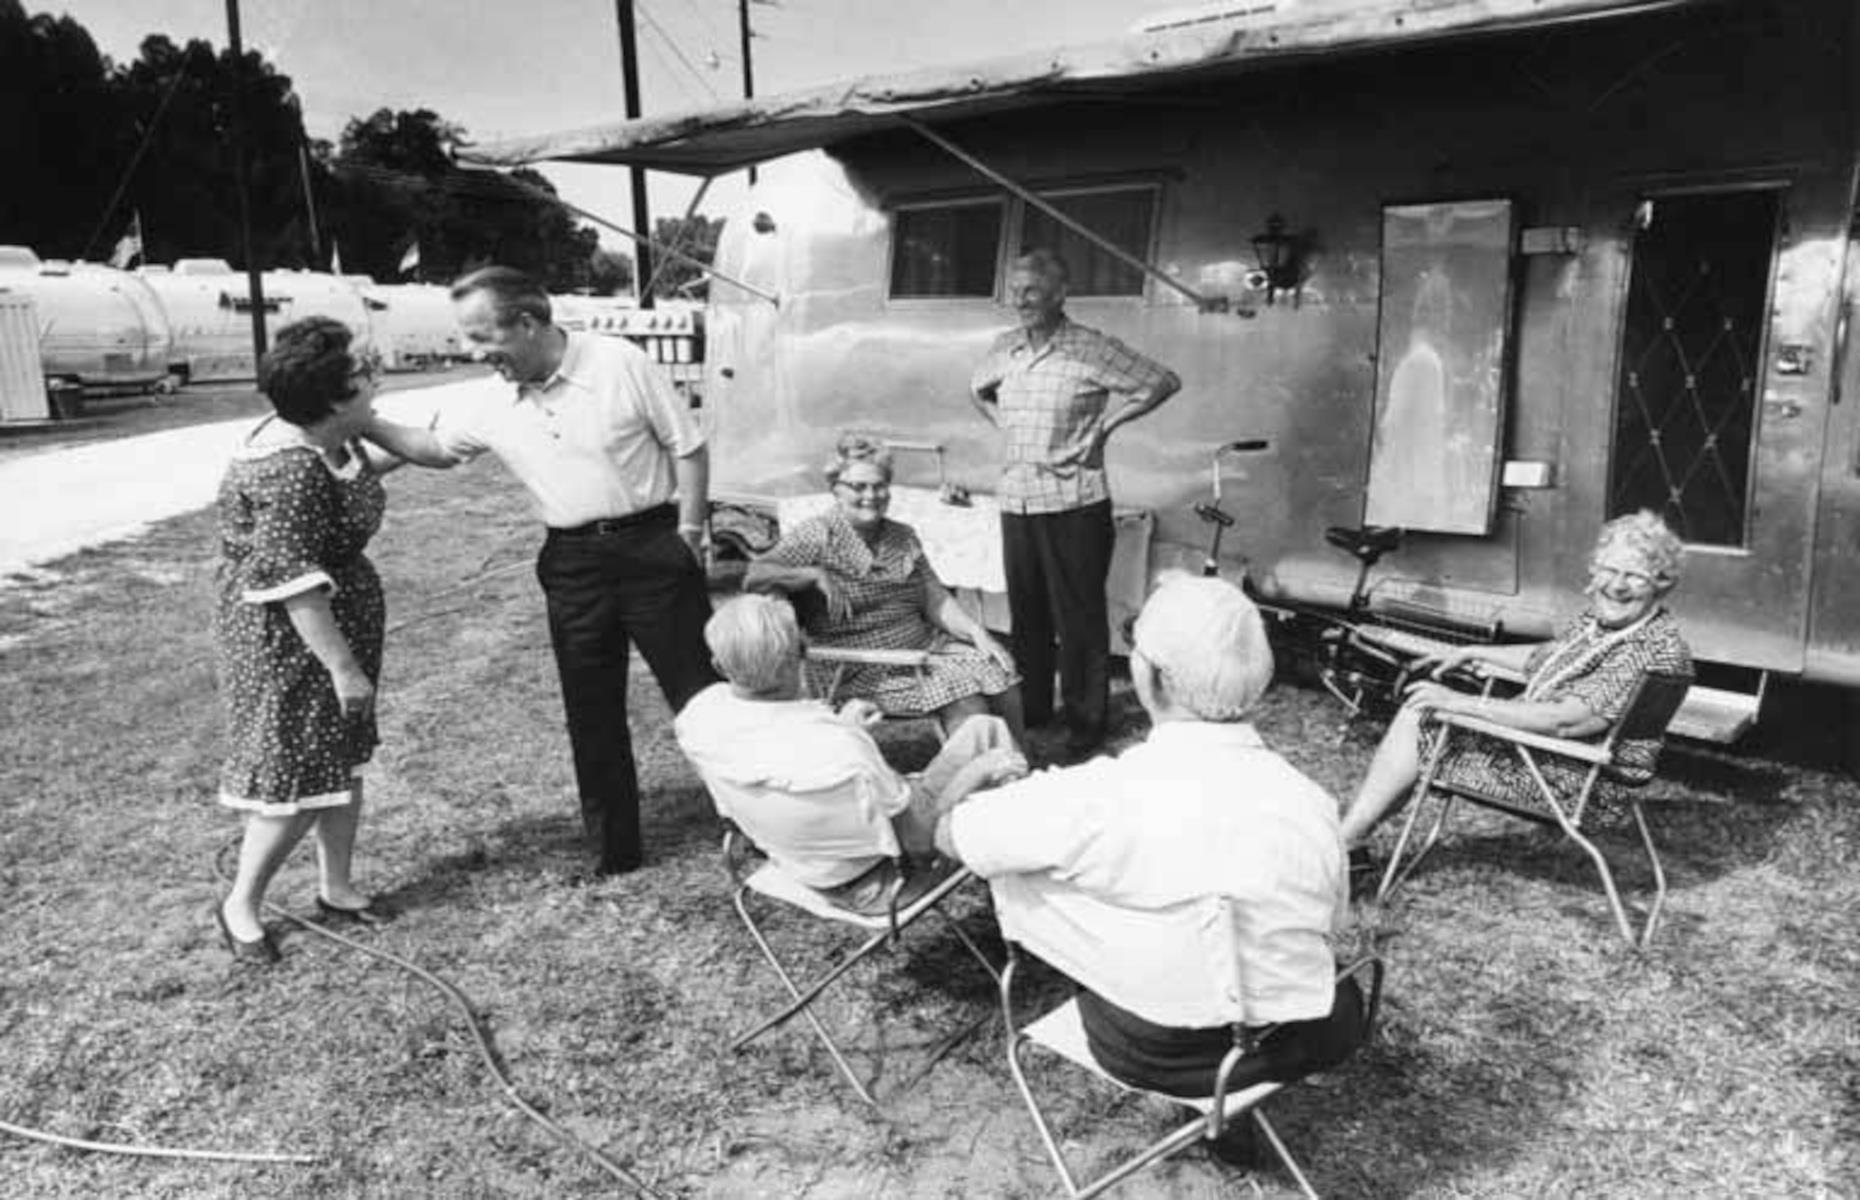 <p>The firm outgrew its Californian HQ by the 50s, and in 1952 Byam opened a larger factory in Ohio.</p>  <p>With sales buoyant throughout the decade, Byam further refined his RV lineup and launched the Airstream International, "the world's first self-contained trailer", in 1958.</p>